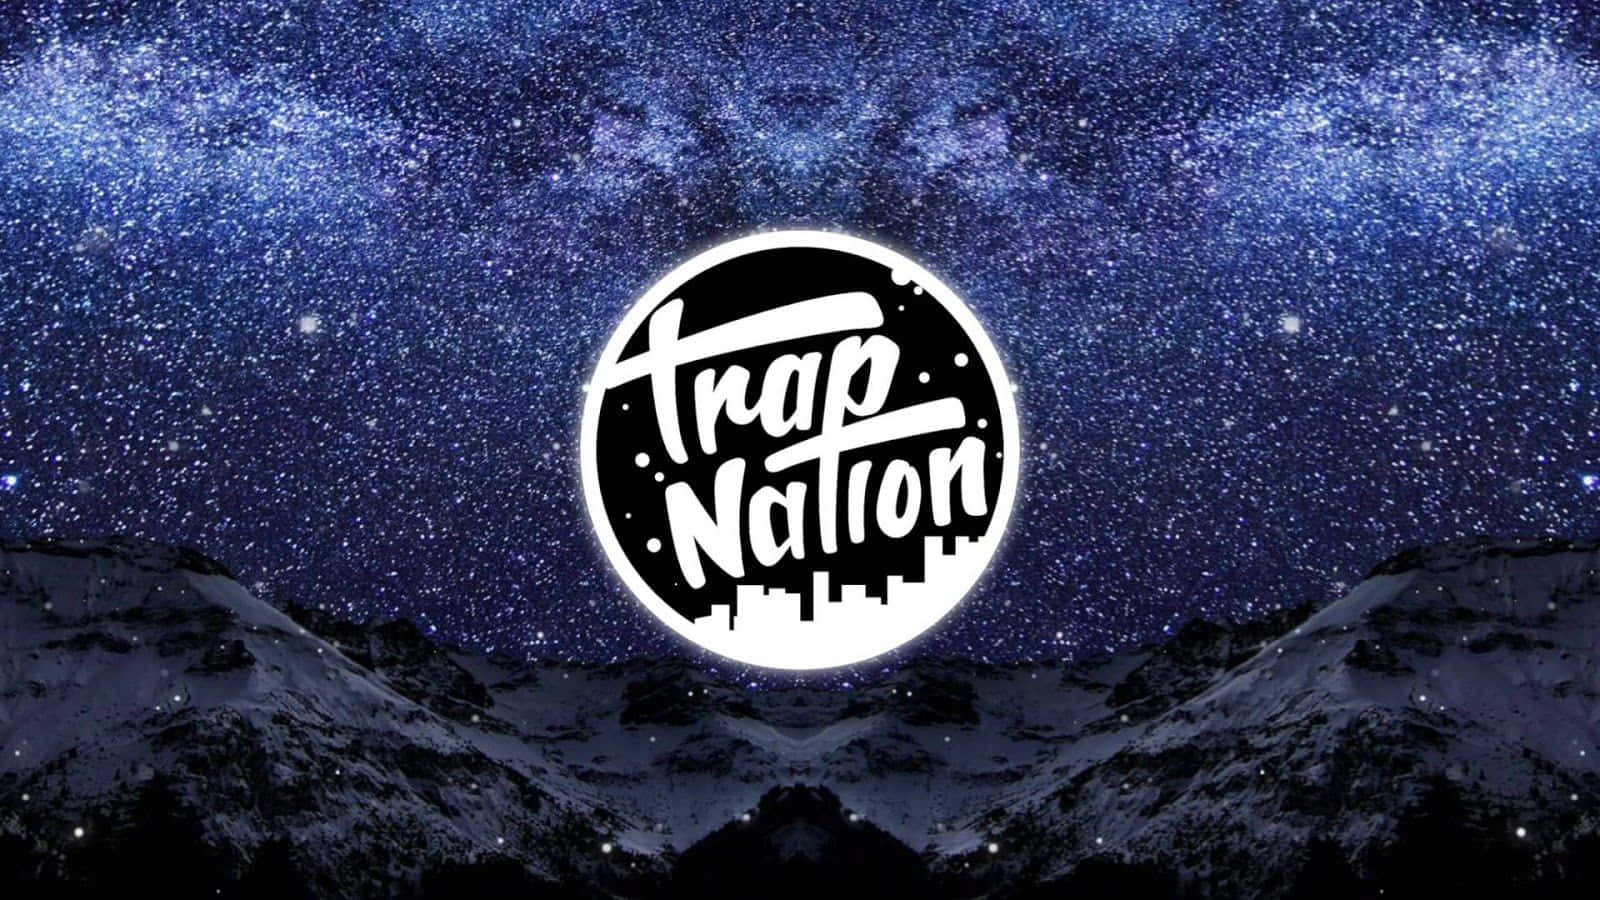 A Black And White Image Of A Starry Sky With The Words'true Nation' Wallpaper